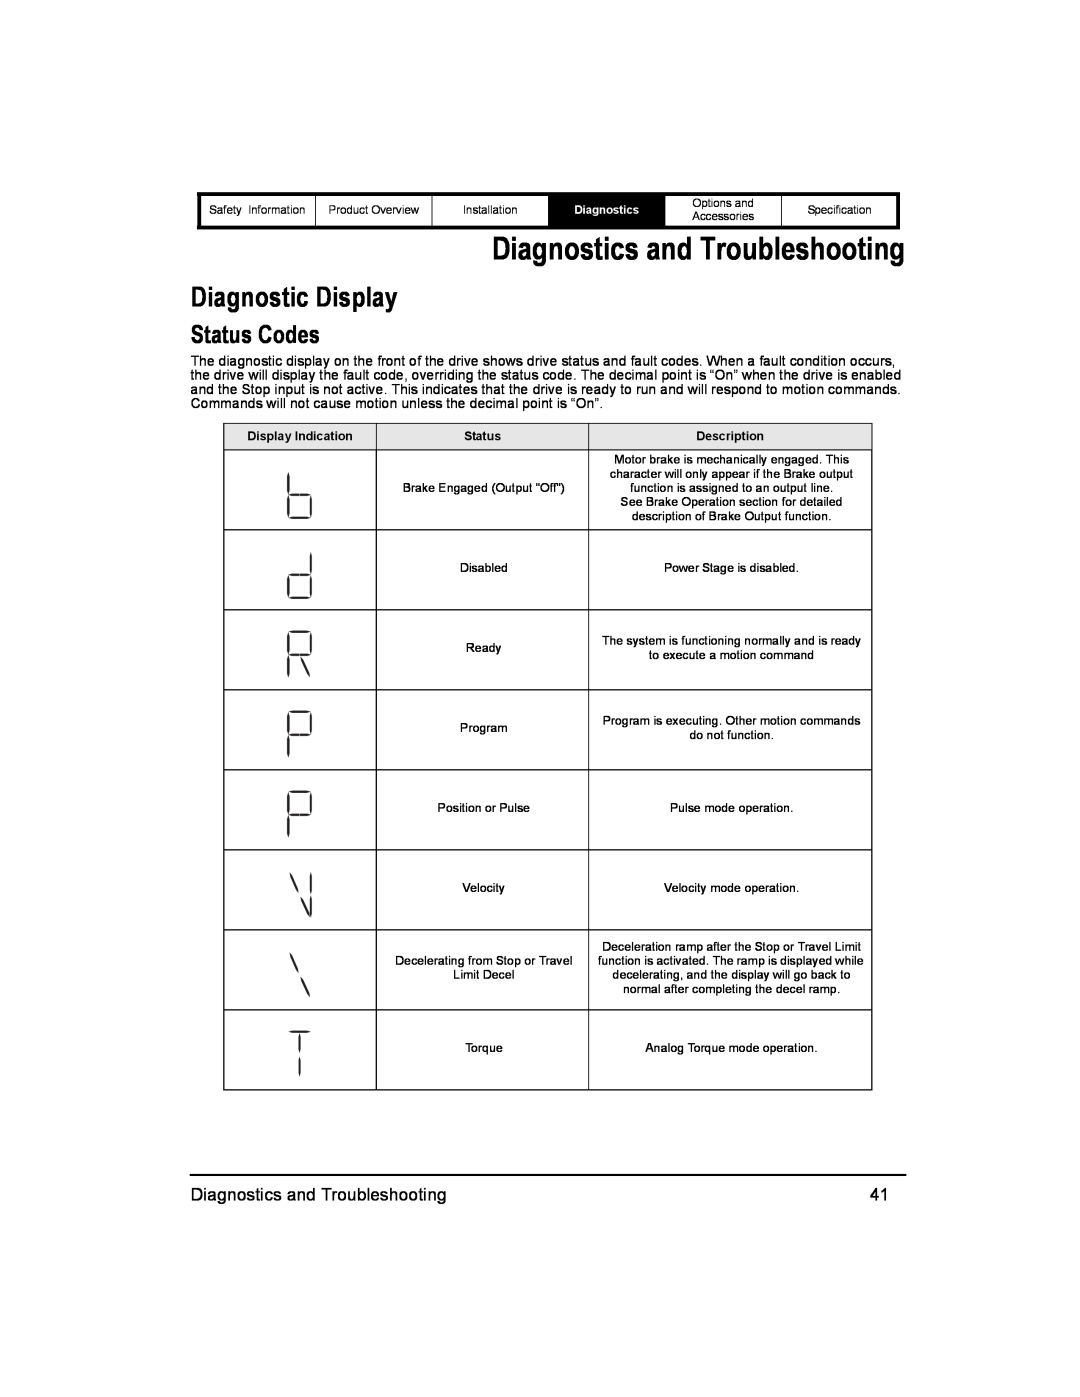 Emerson 400518-01 installation manual Diagnostics and Troubleshooting, Diagnostic Display, Status Codes 